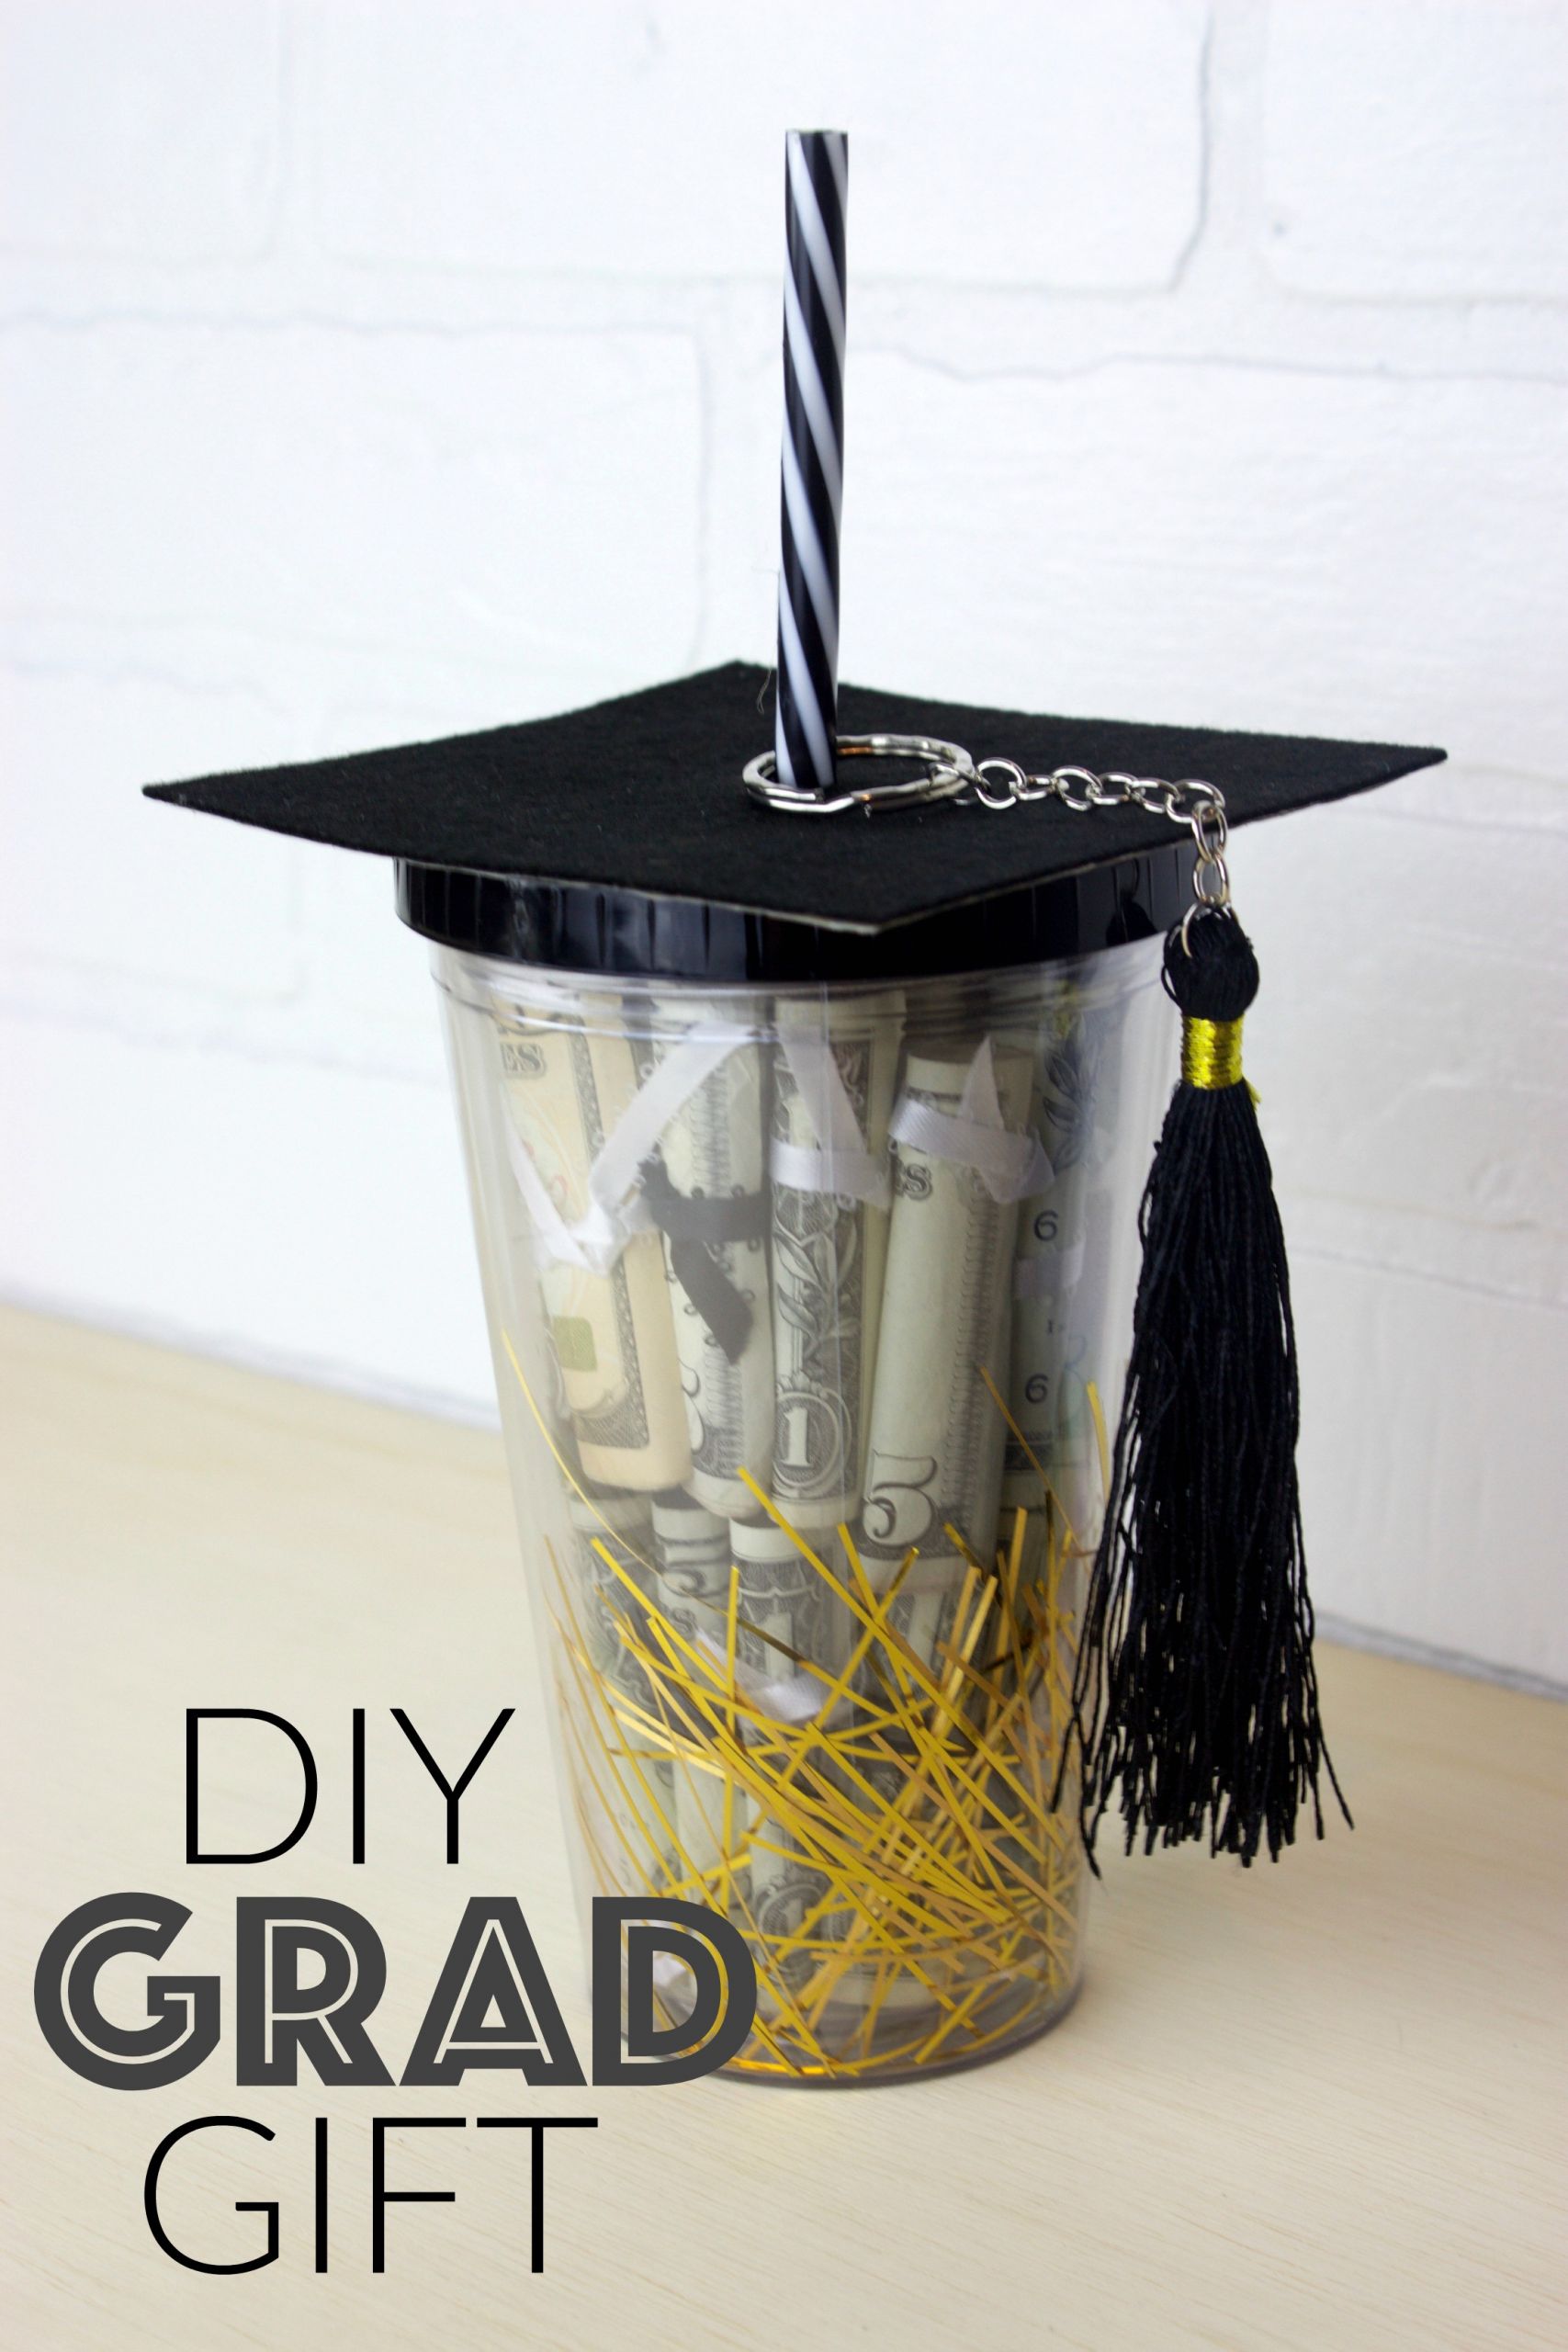 Make Graduation Gift Ideas For Friends
 DIY Graduation Gift in a Cup